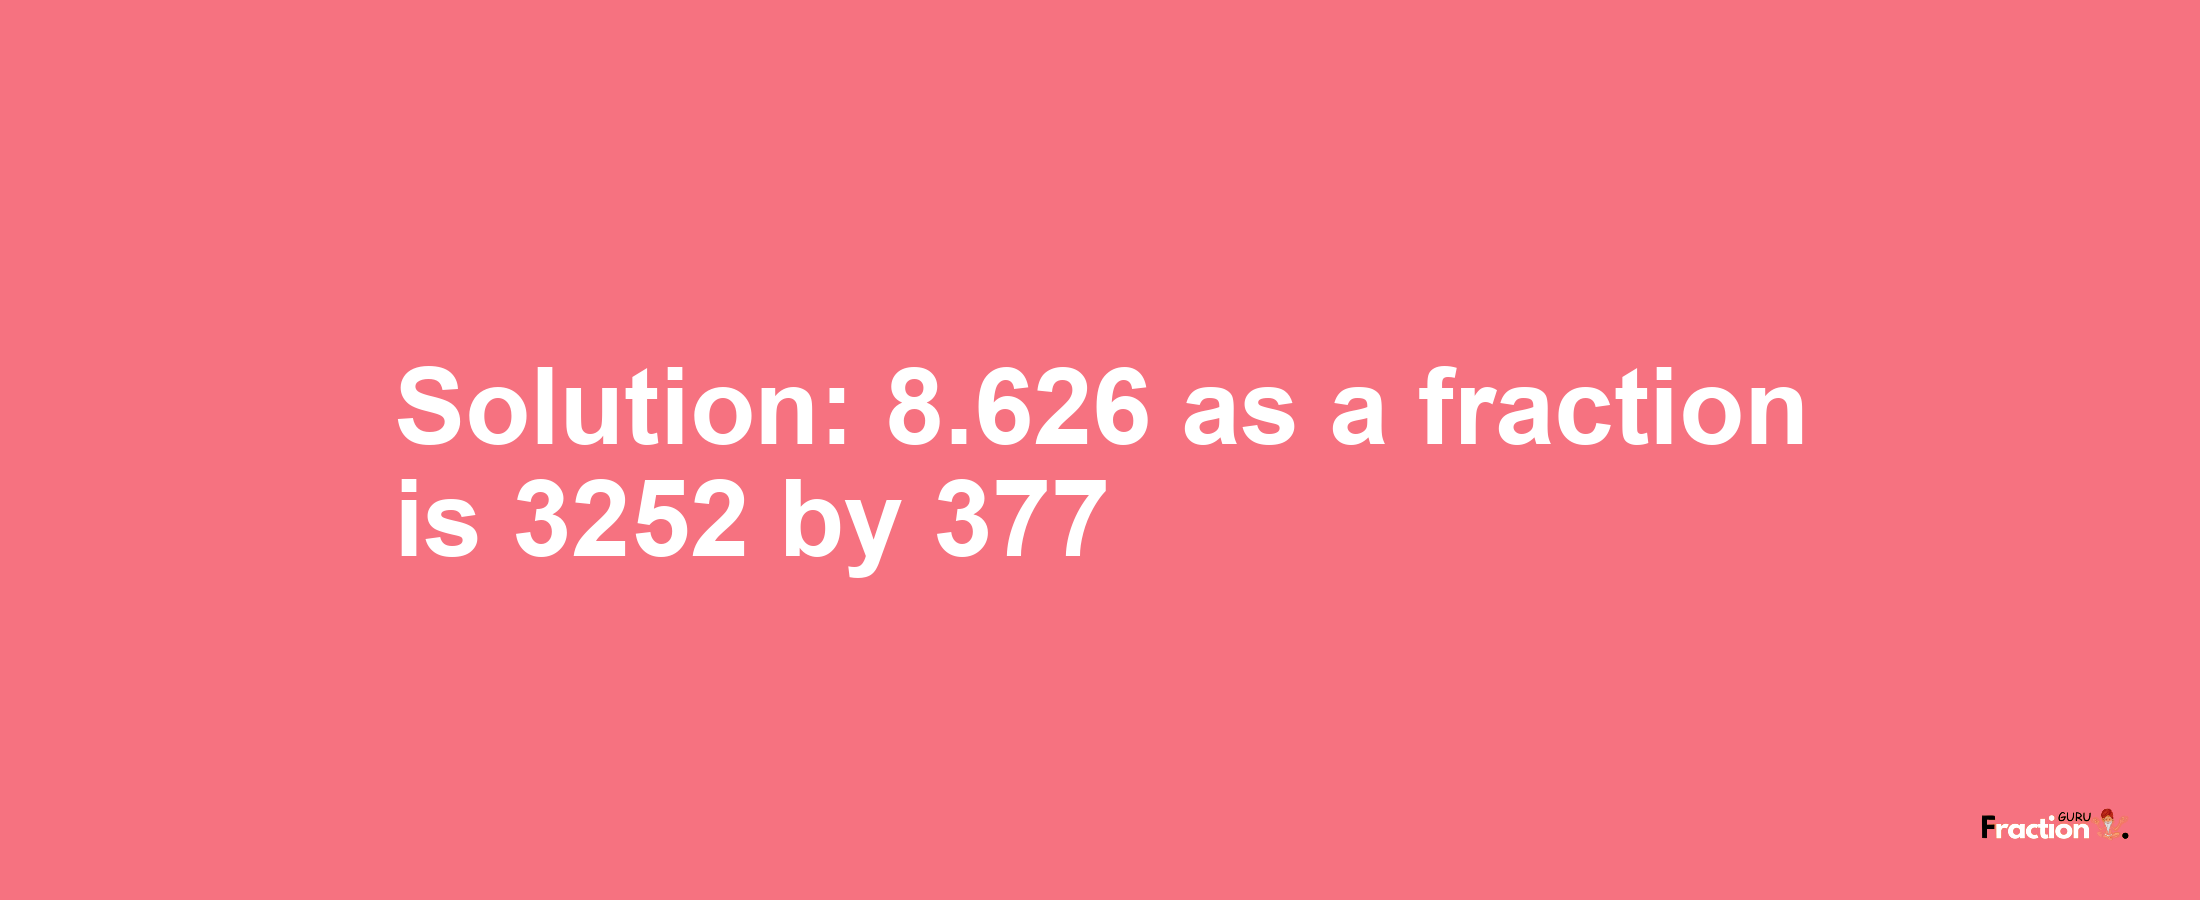 Solution:8.626 as a fraction is 3252/377